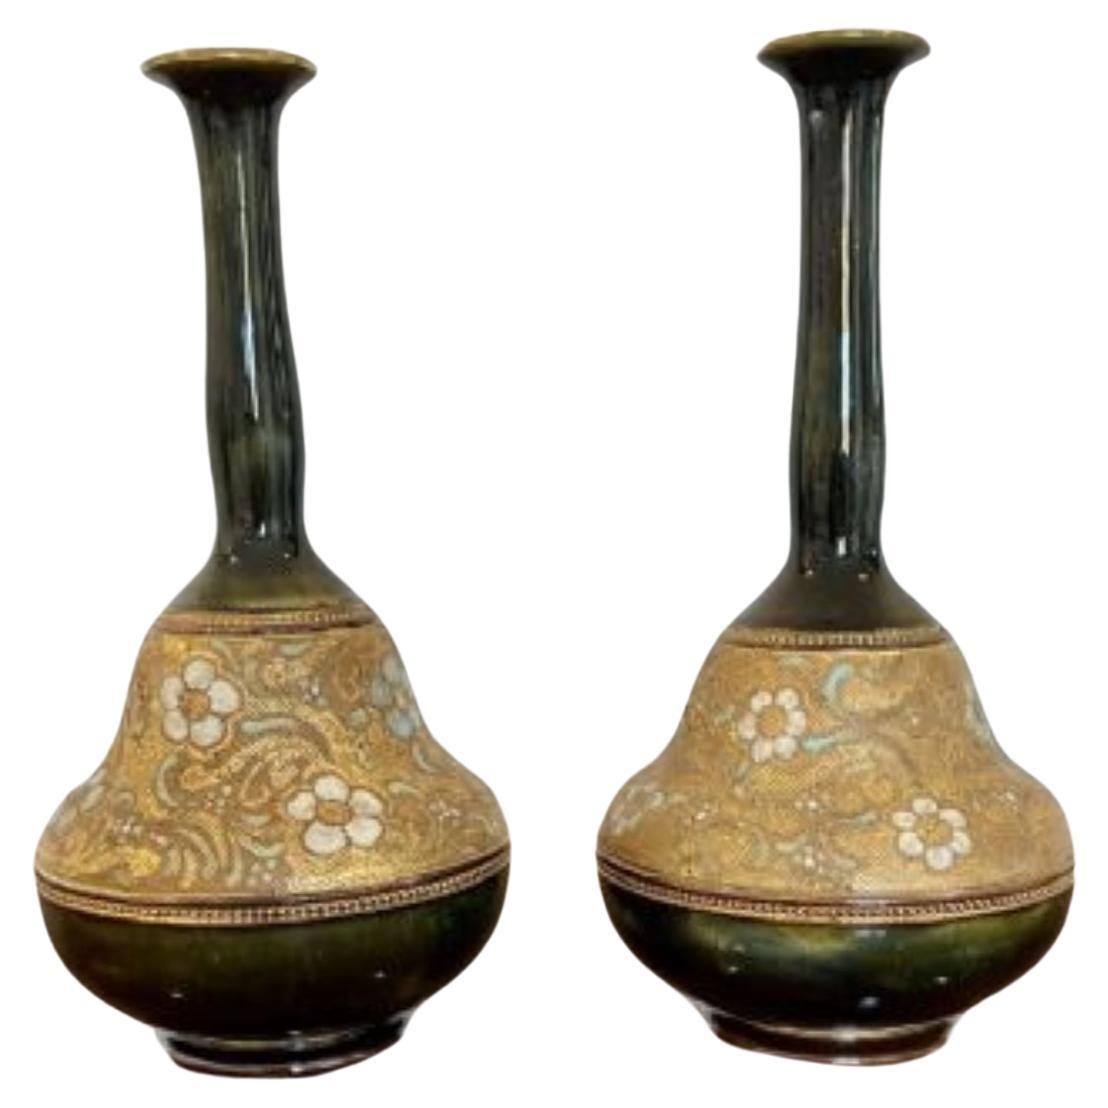 Unusual shaped pair of quality antique Doulton vases 